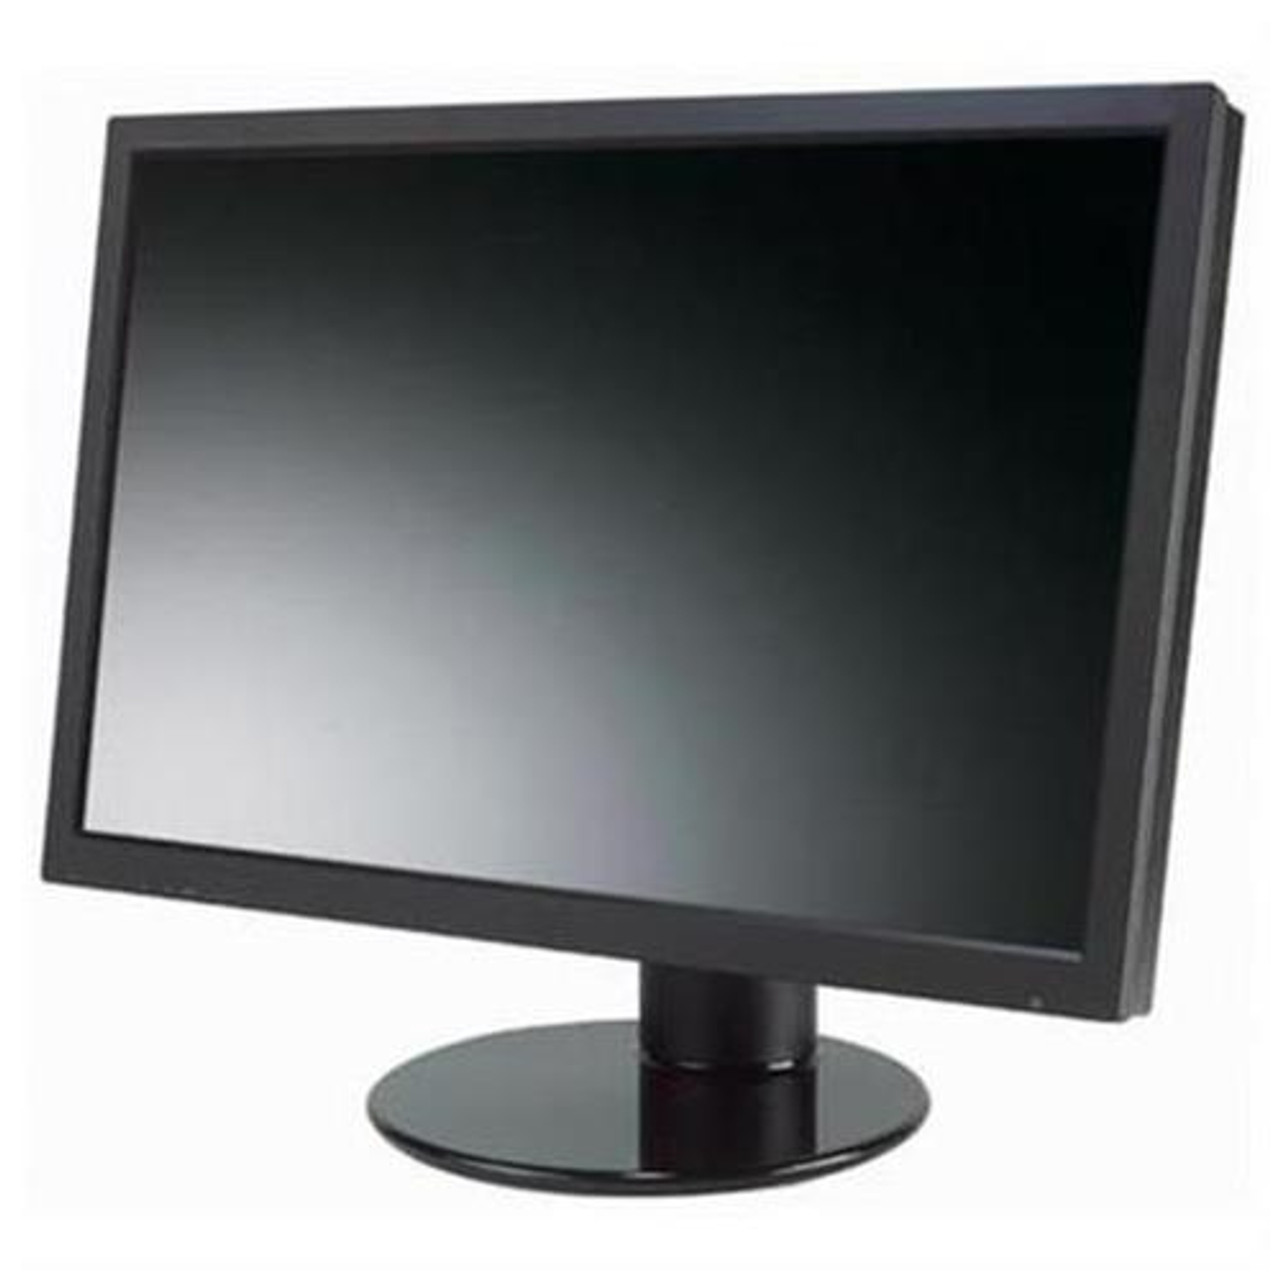 P8727AA - HP Pavilion F2105 21-inch LCD Widescreen Display